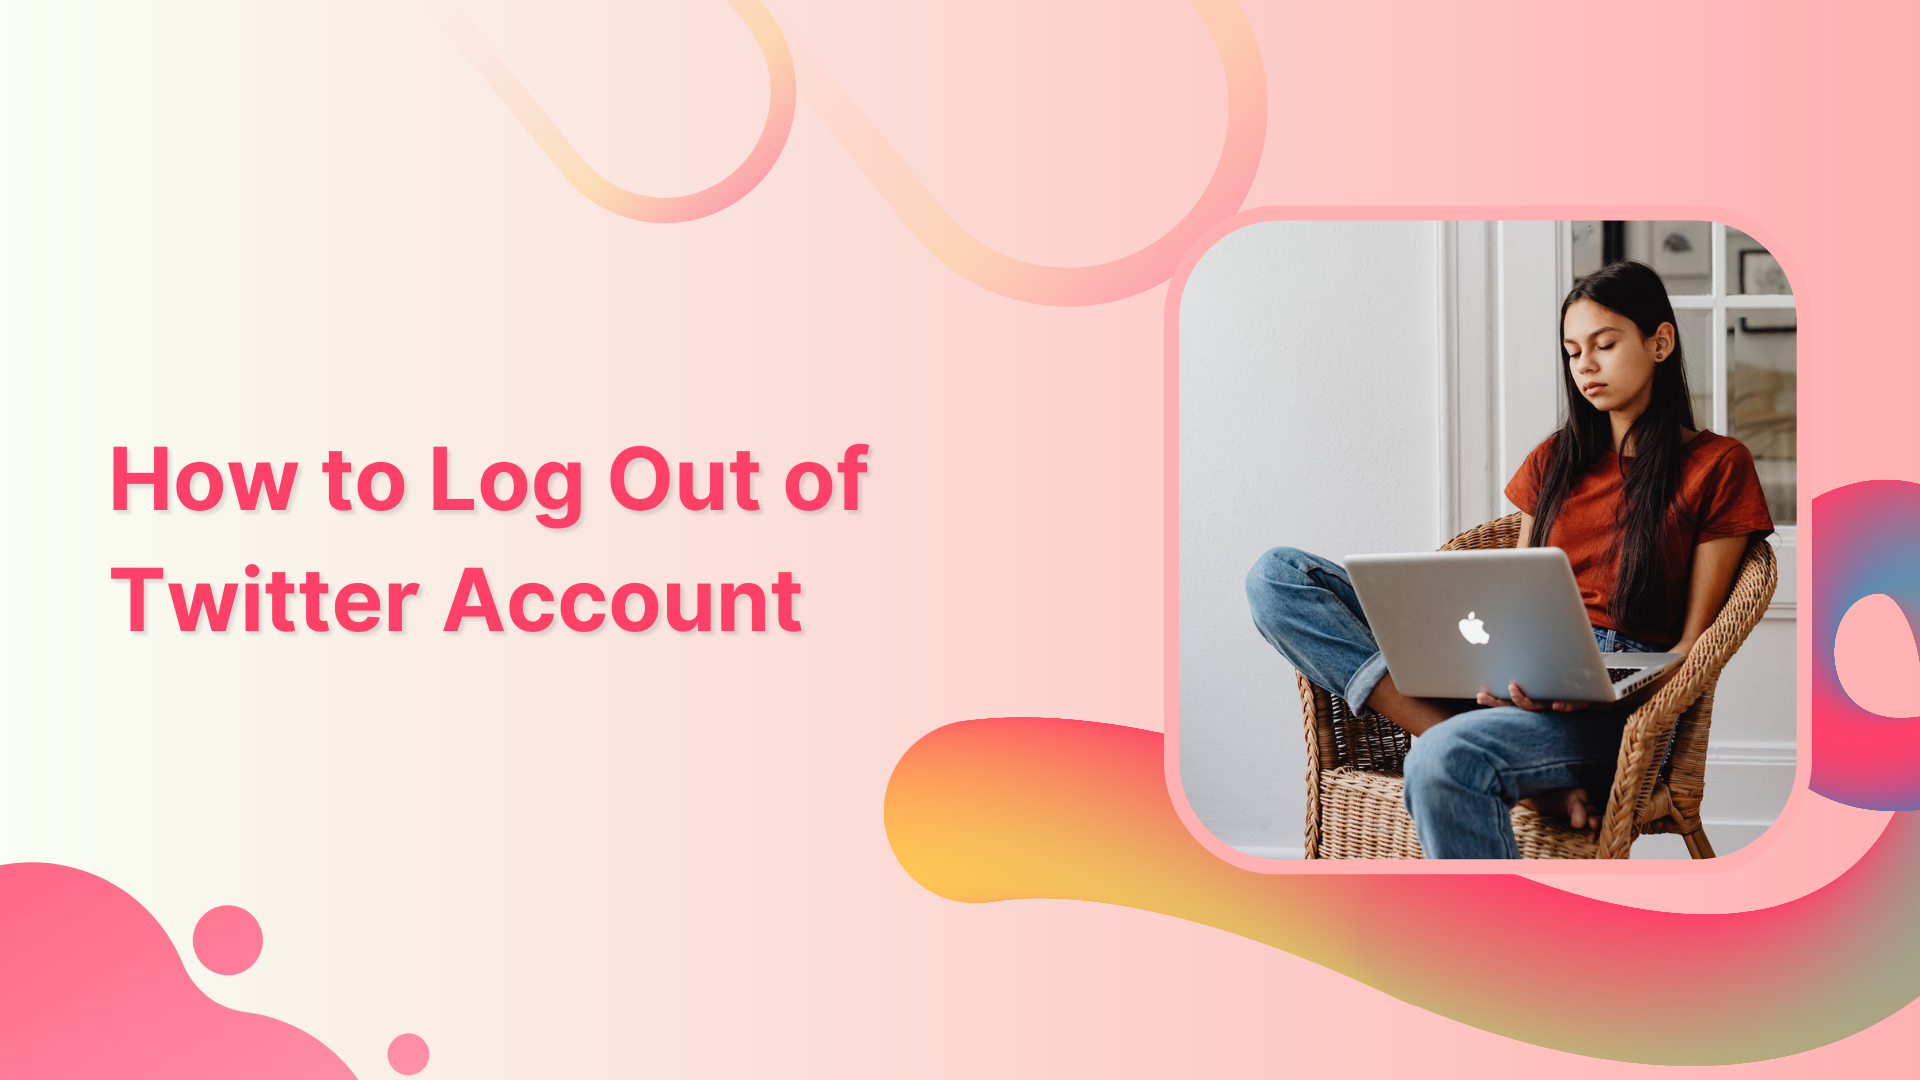 How to log out twitter account